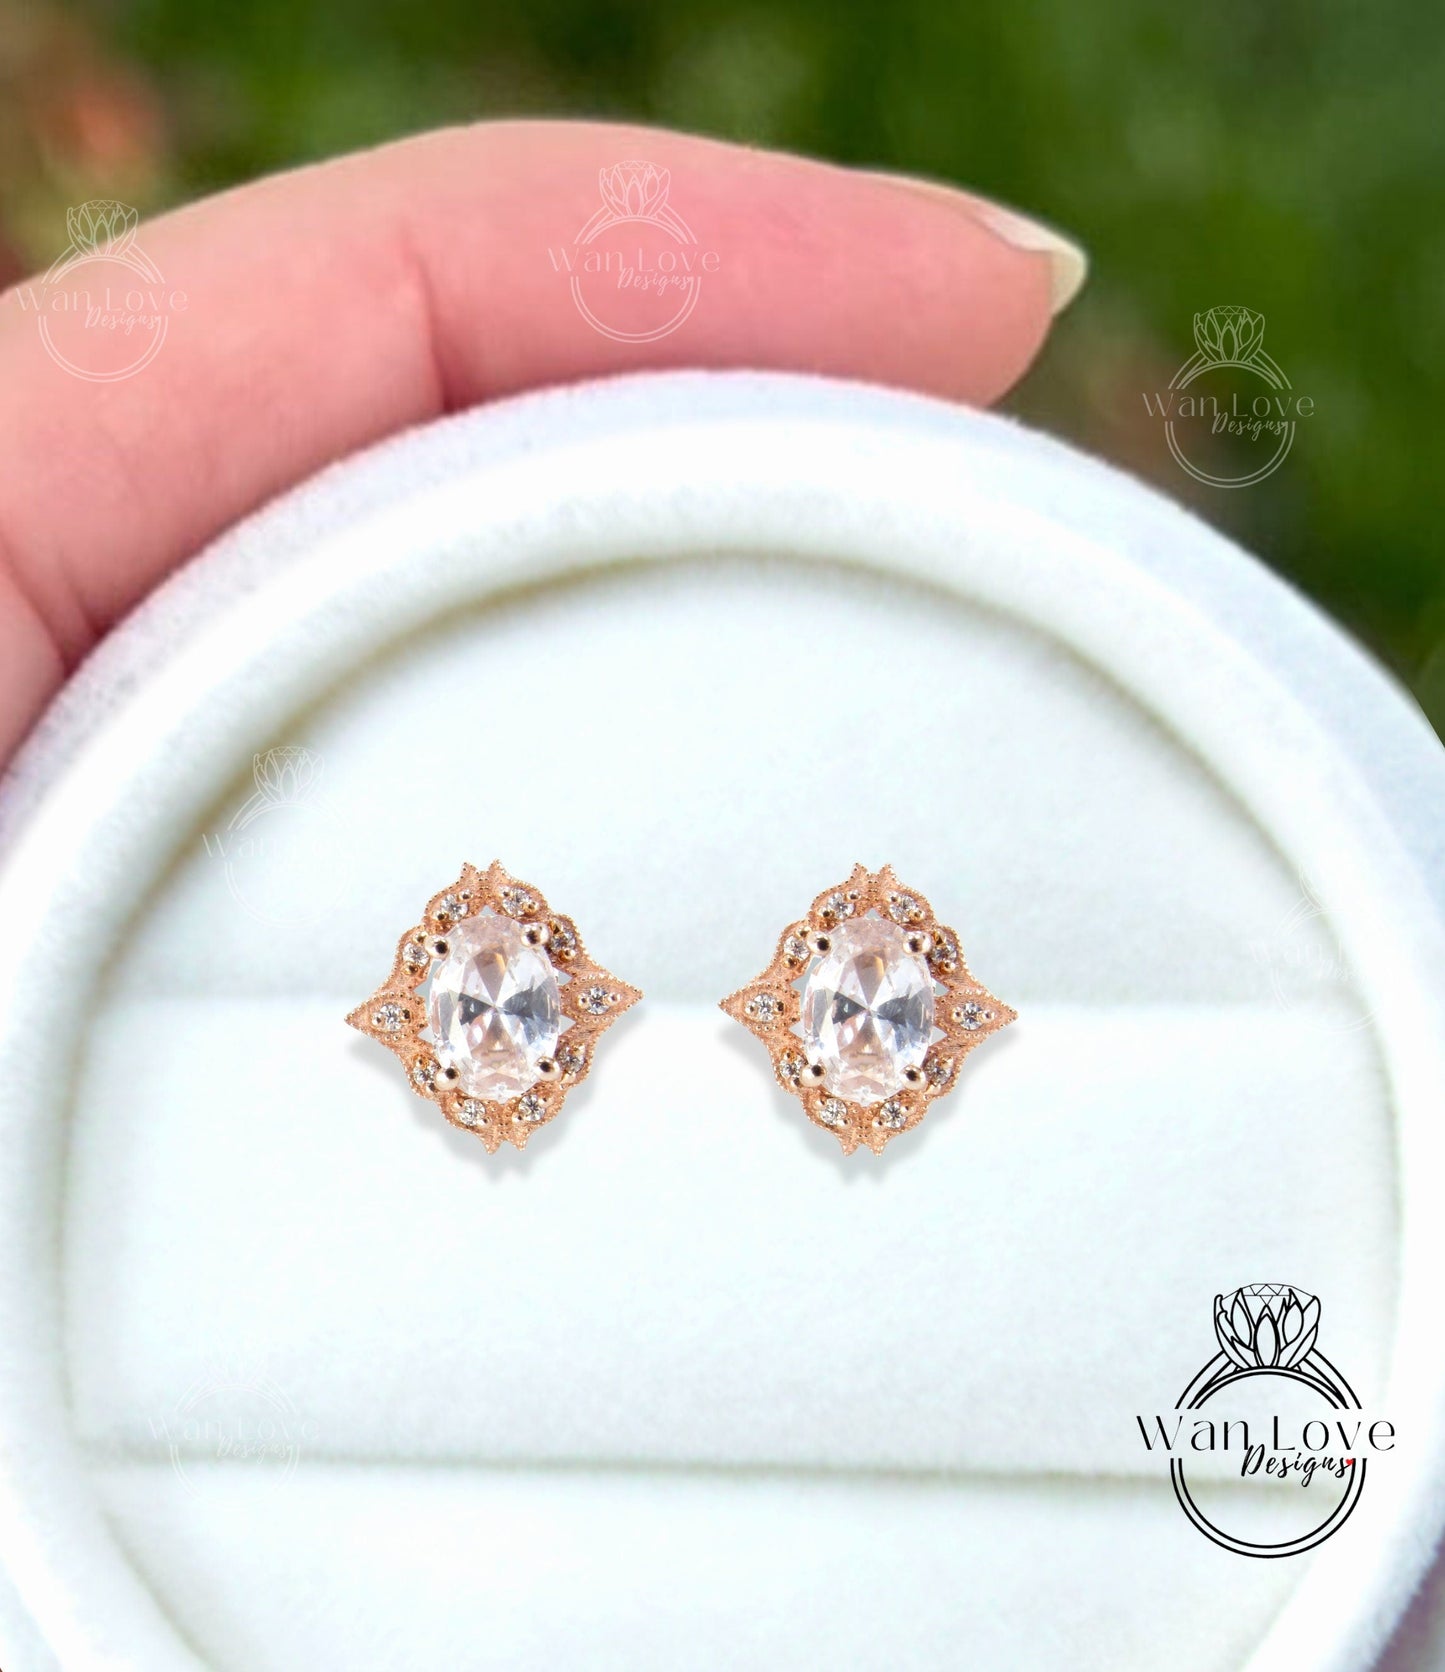 Art deco White Sapphire halo Earrings Unique vintage Moissanite milgrain Bridal studs Oval cut floral Wedding Day Anniversary jewelry gift Wan Love Designs